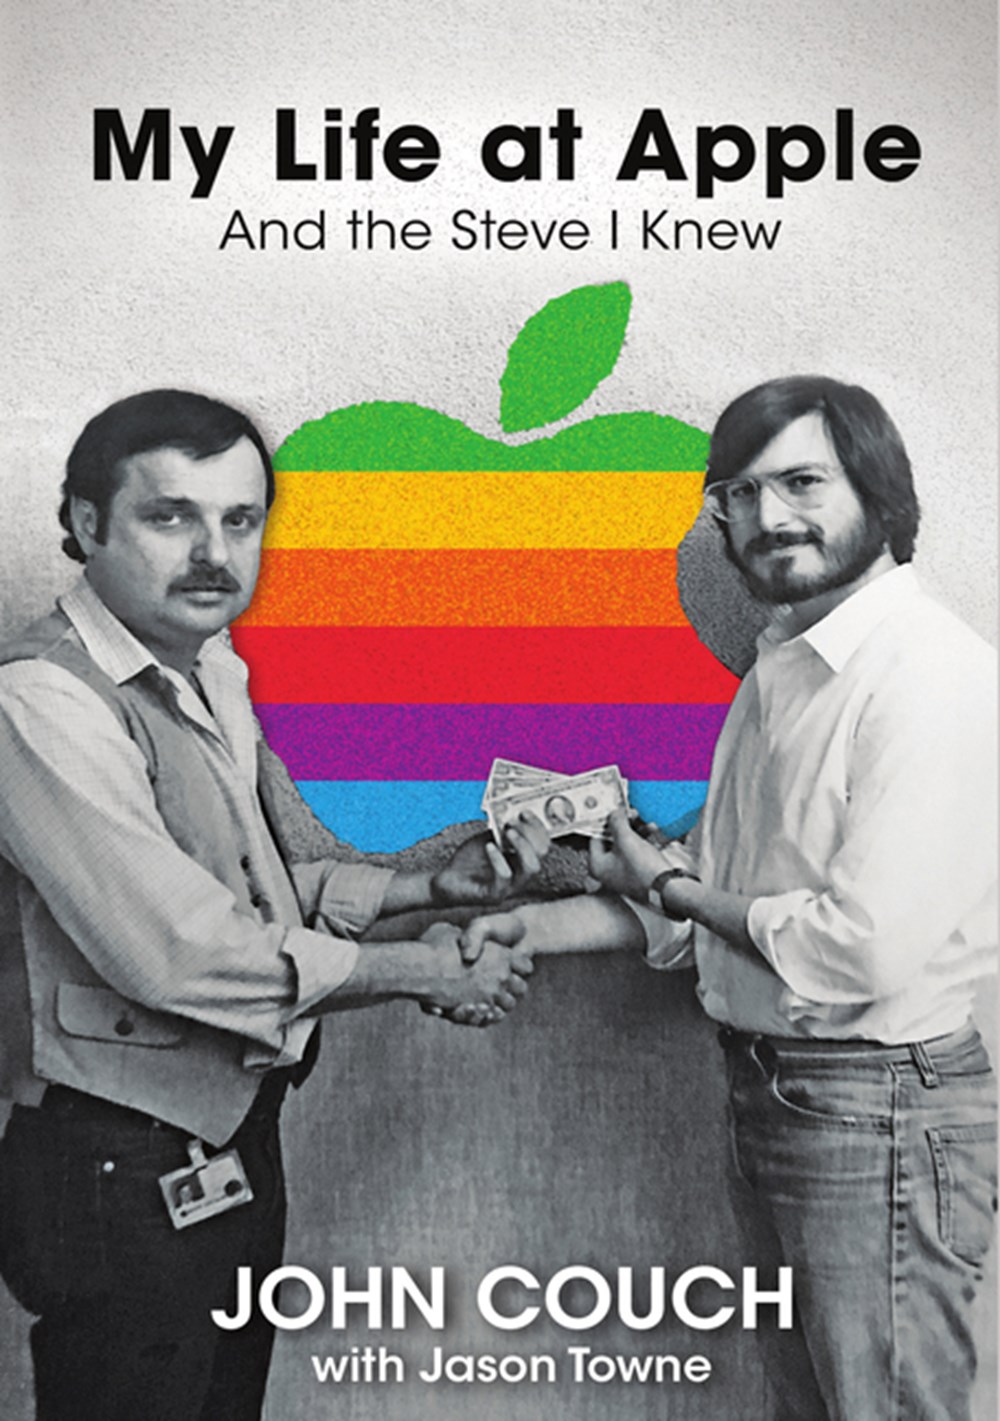 My Life at Apple And the Steve I Knew